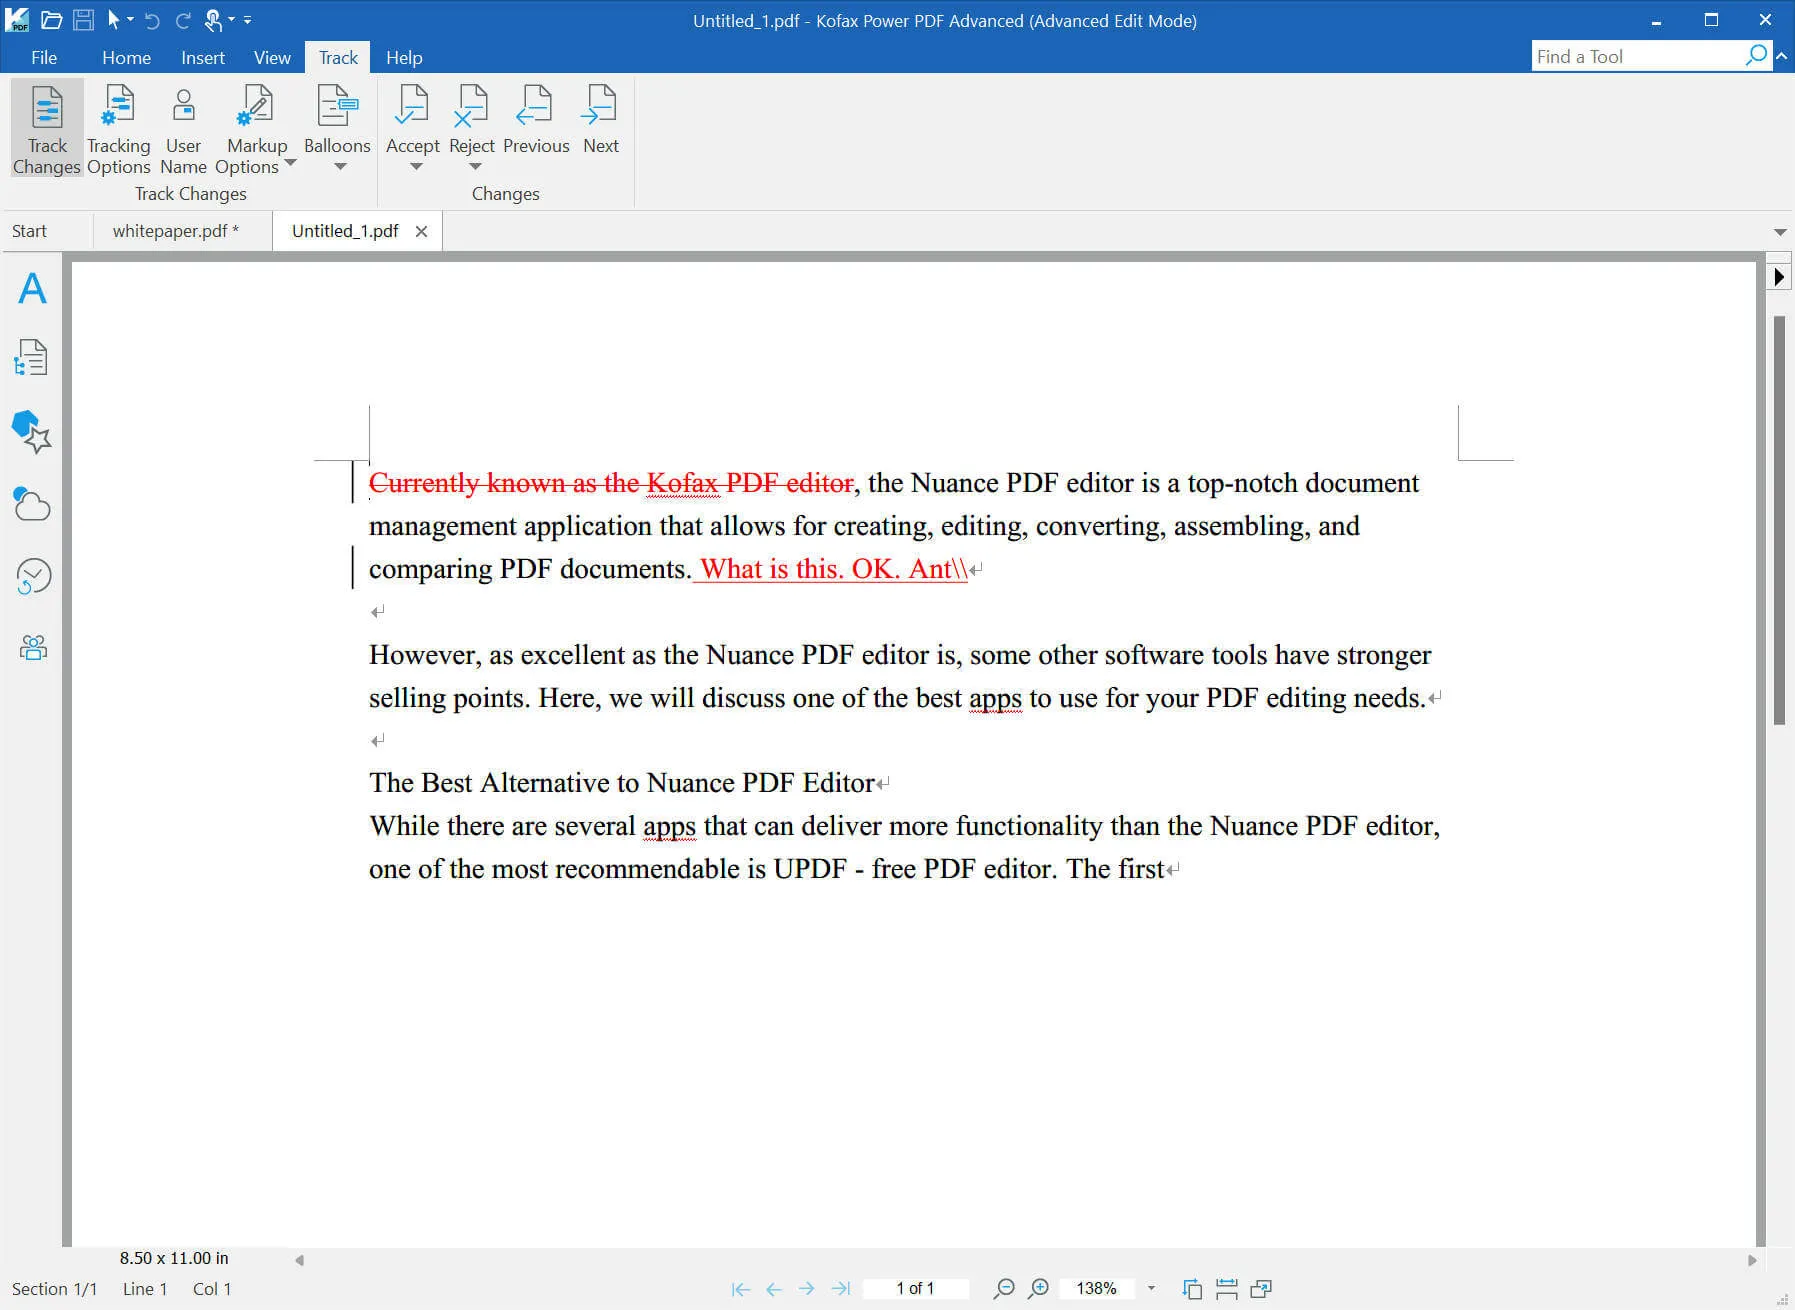 Track changes in PDF with Nuance PDF Editor